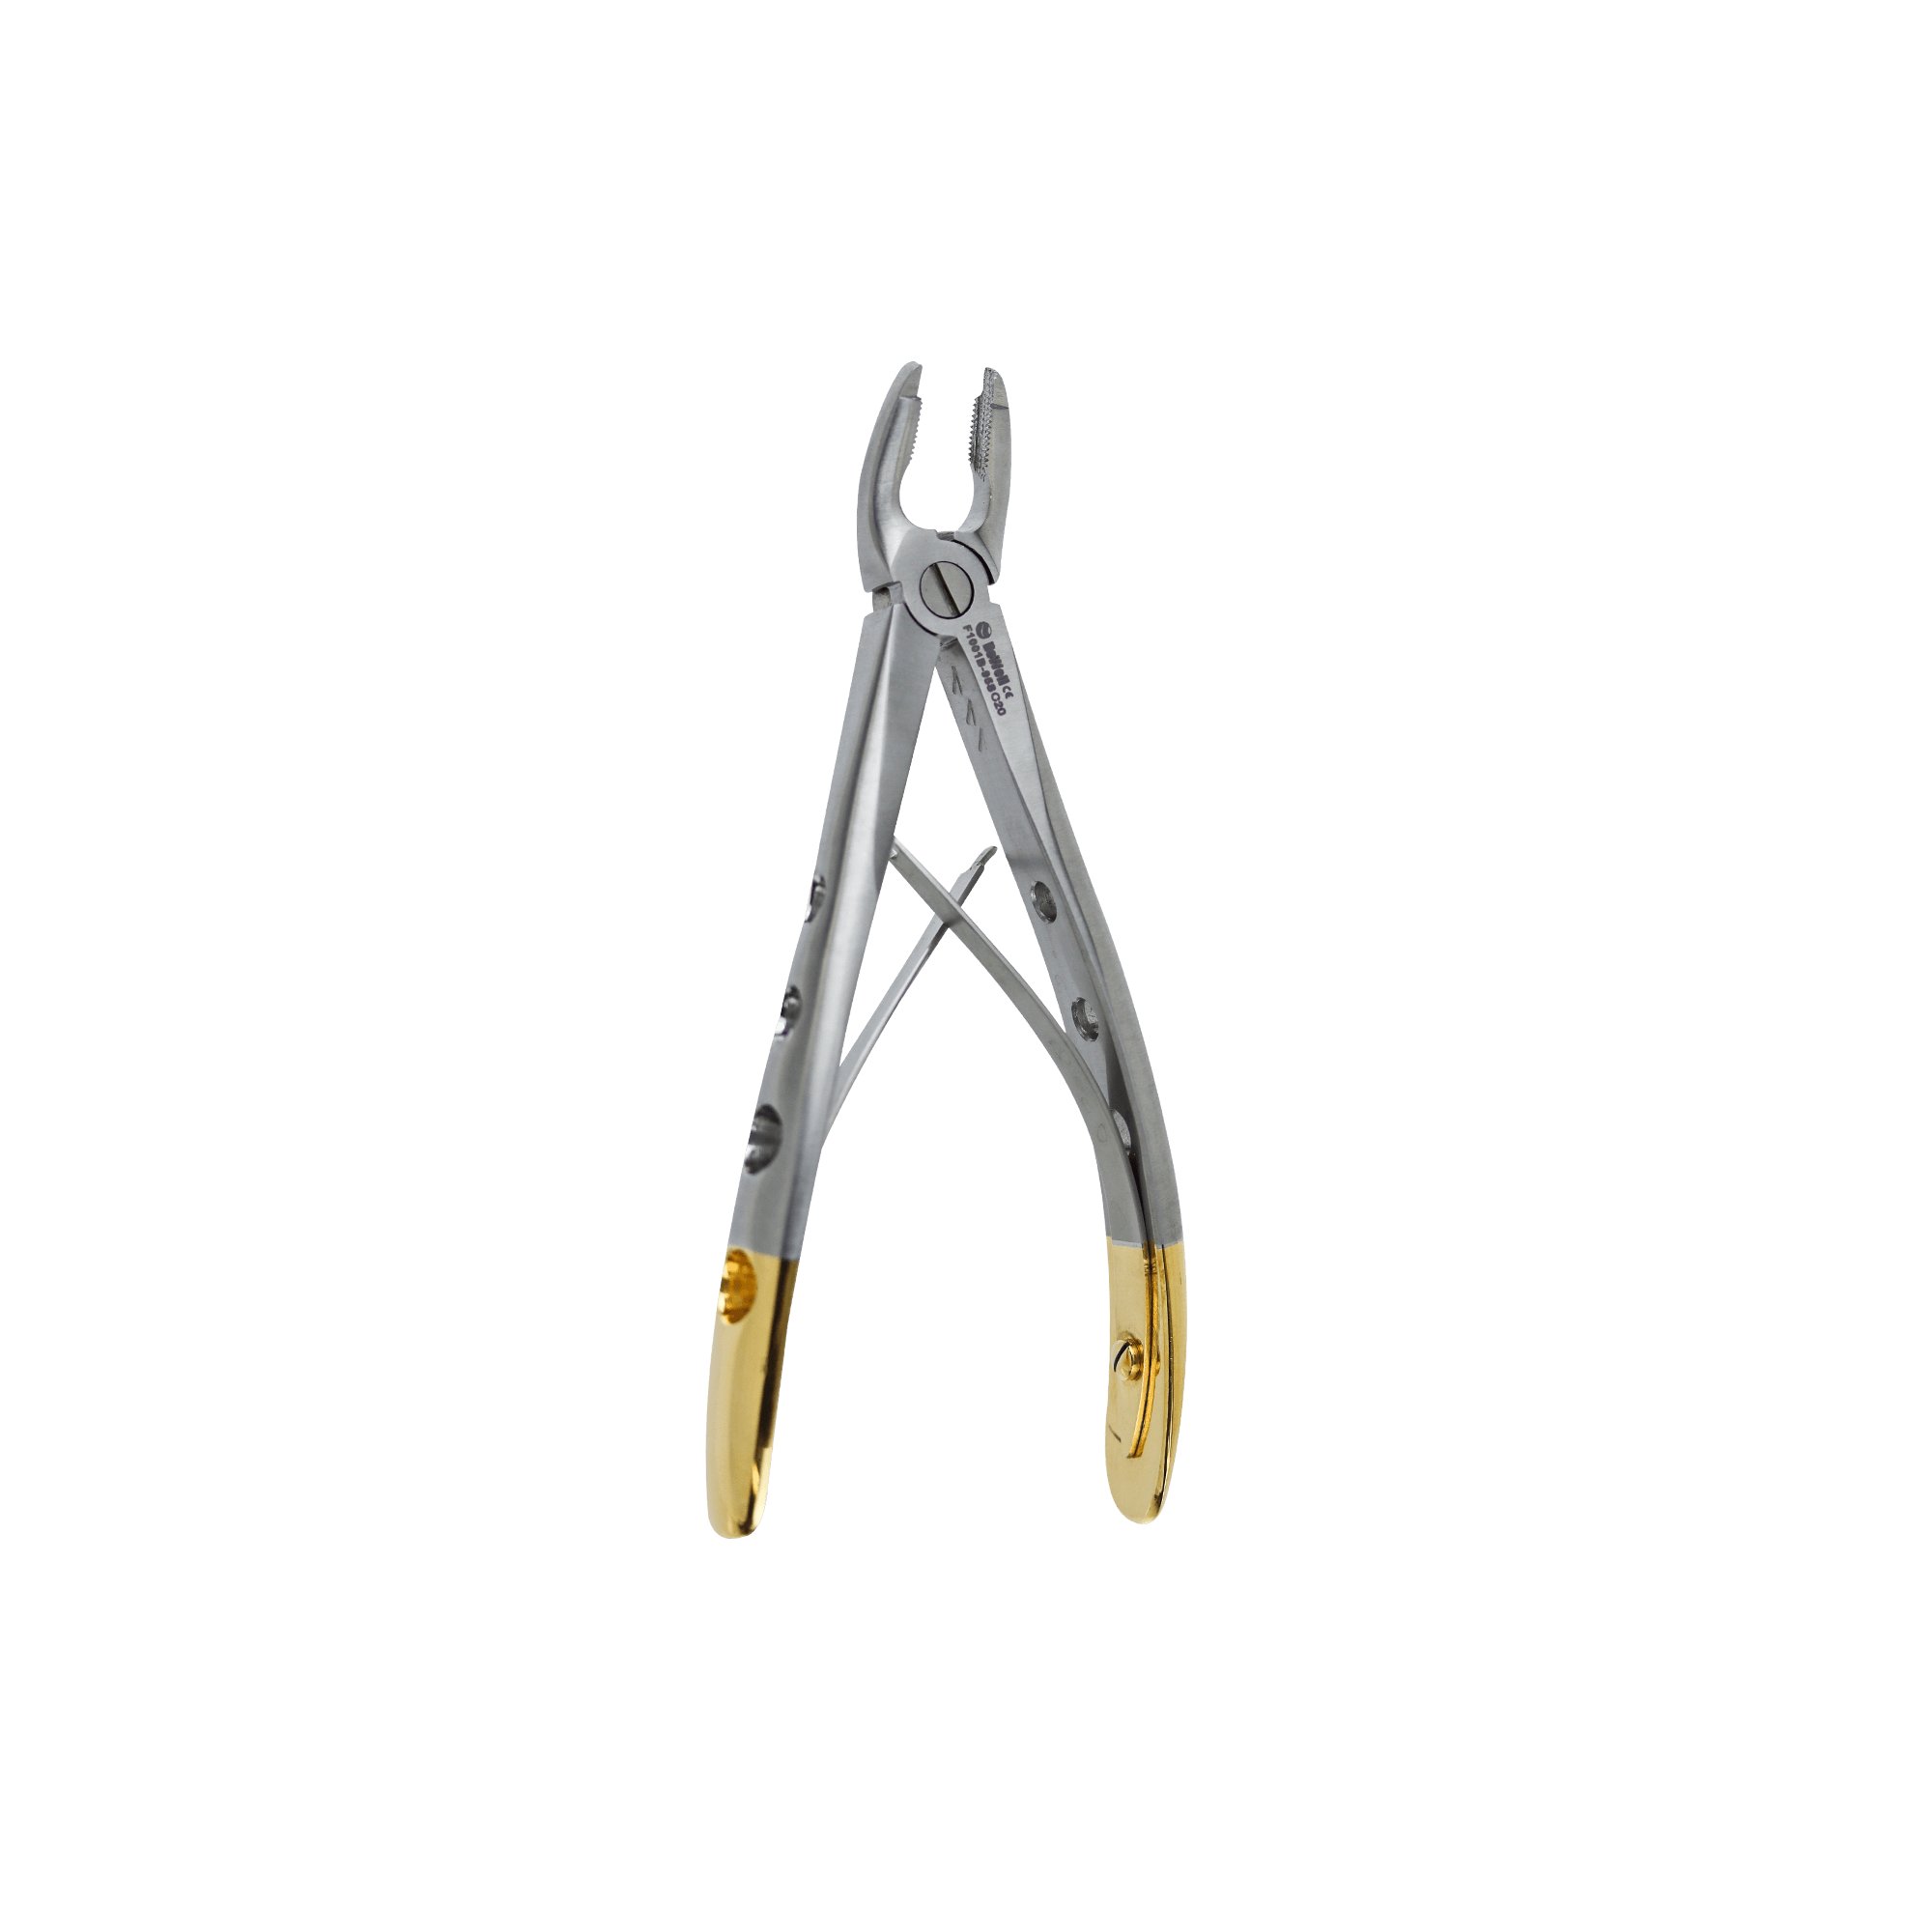 Atraumatic Extraction Apical Retention Forcep-Upper Universal pediatric extraction forceps